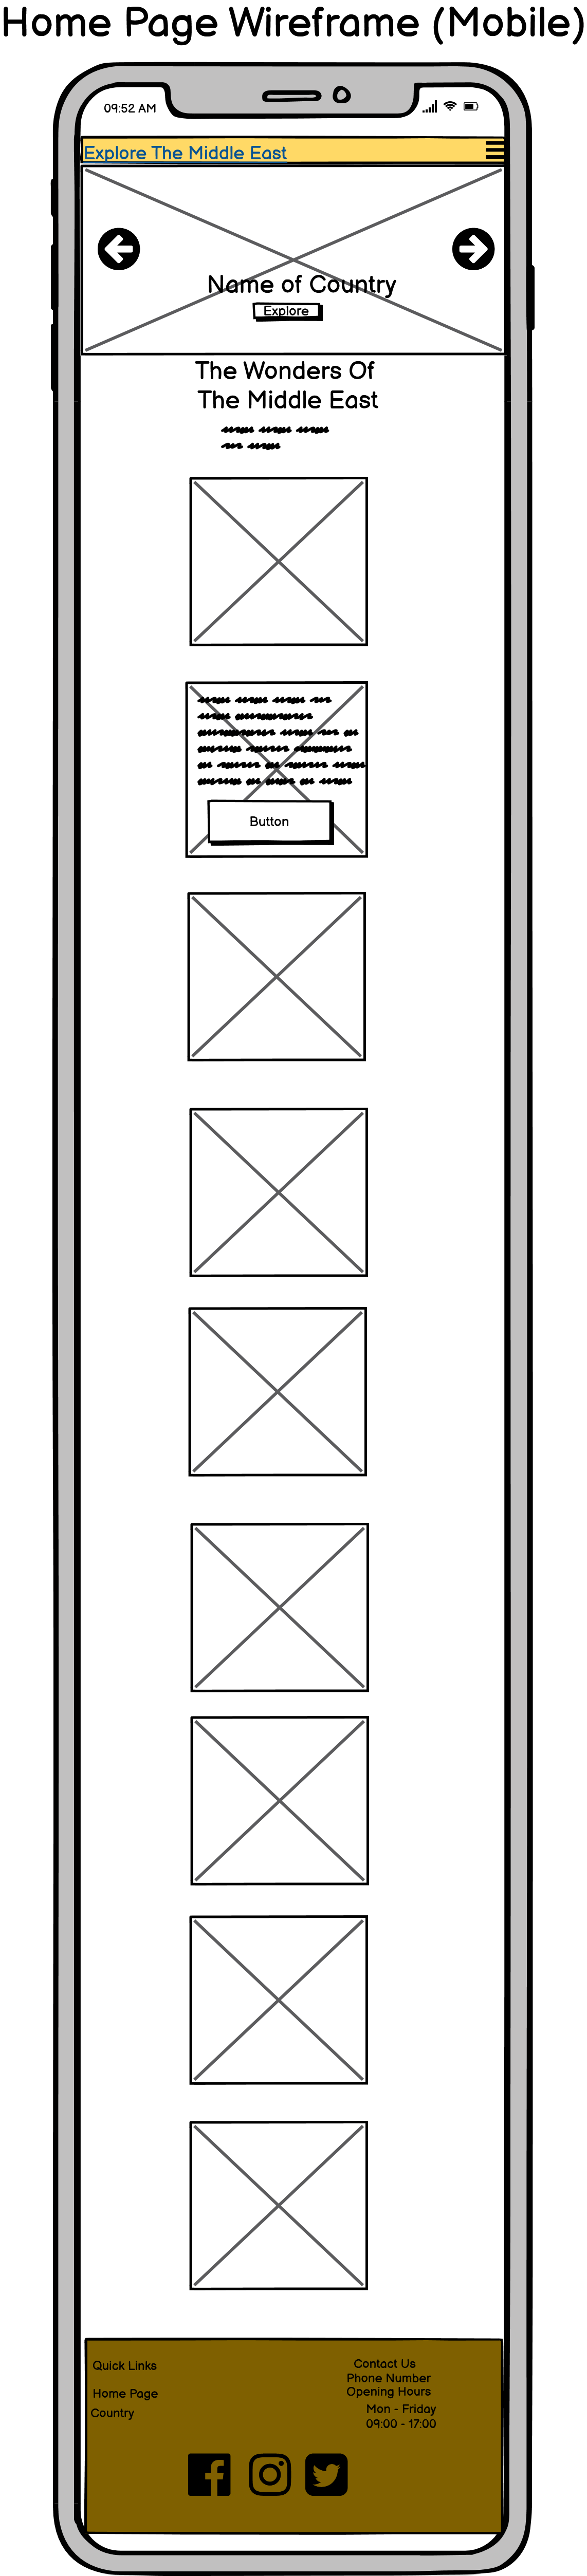 home-page-wireframe-mobile.png